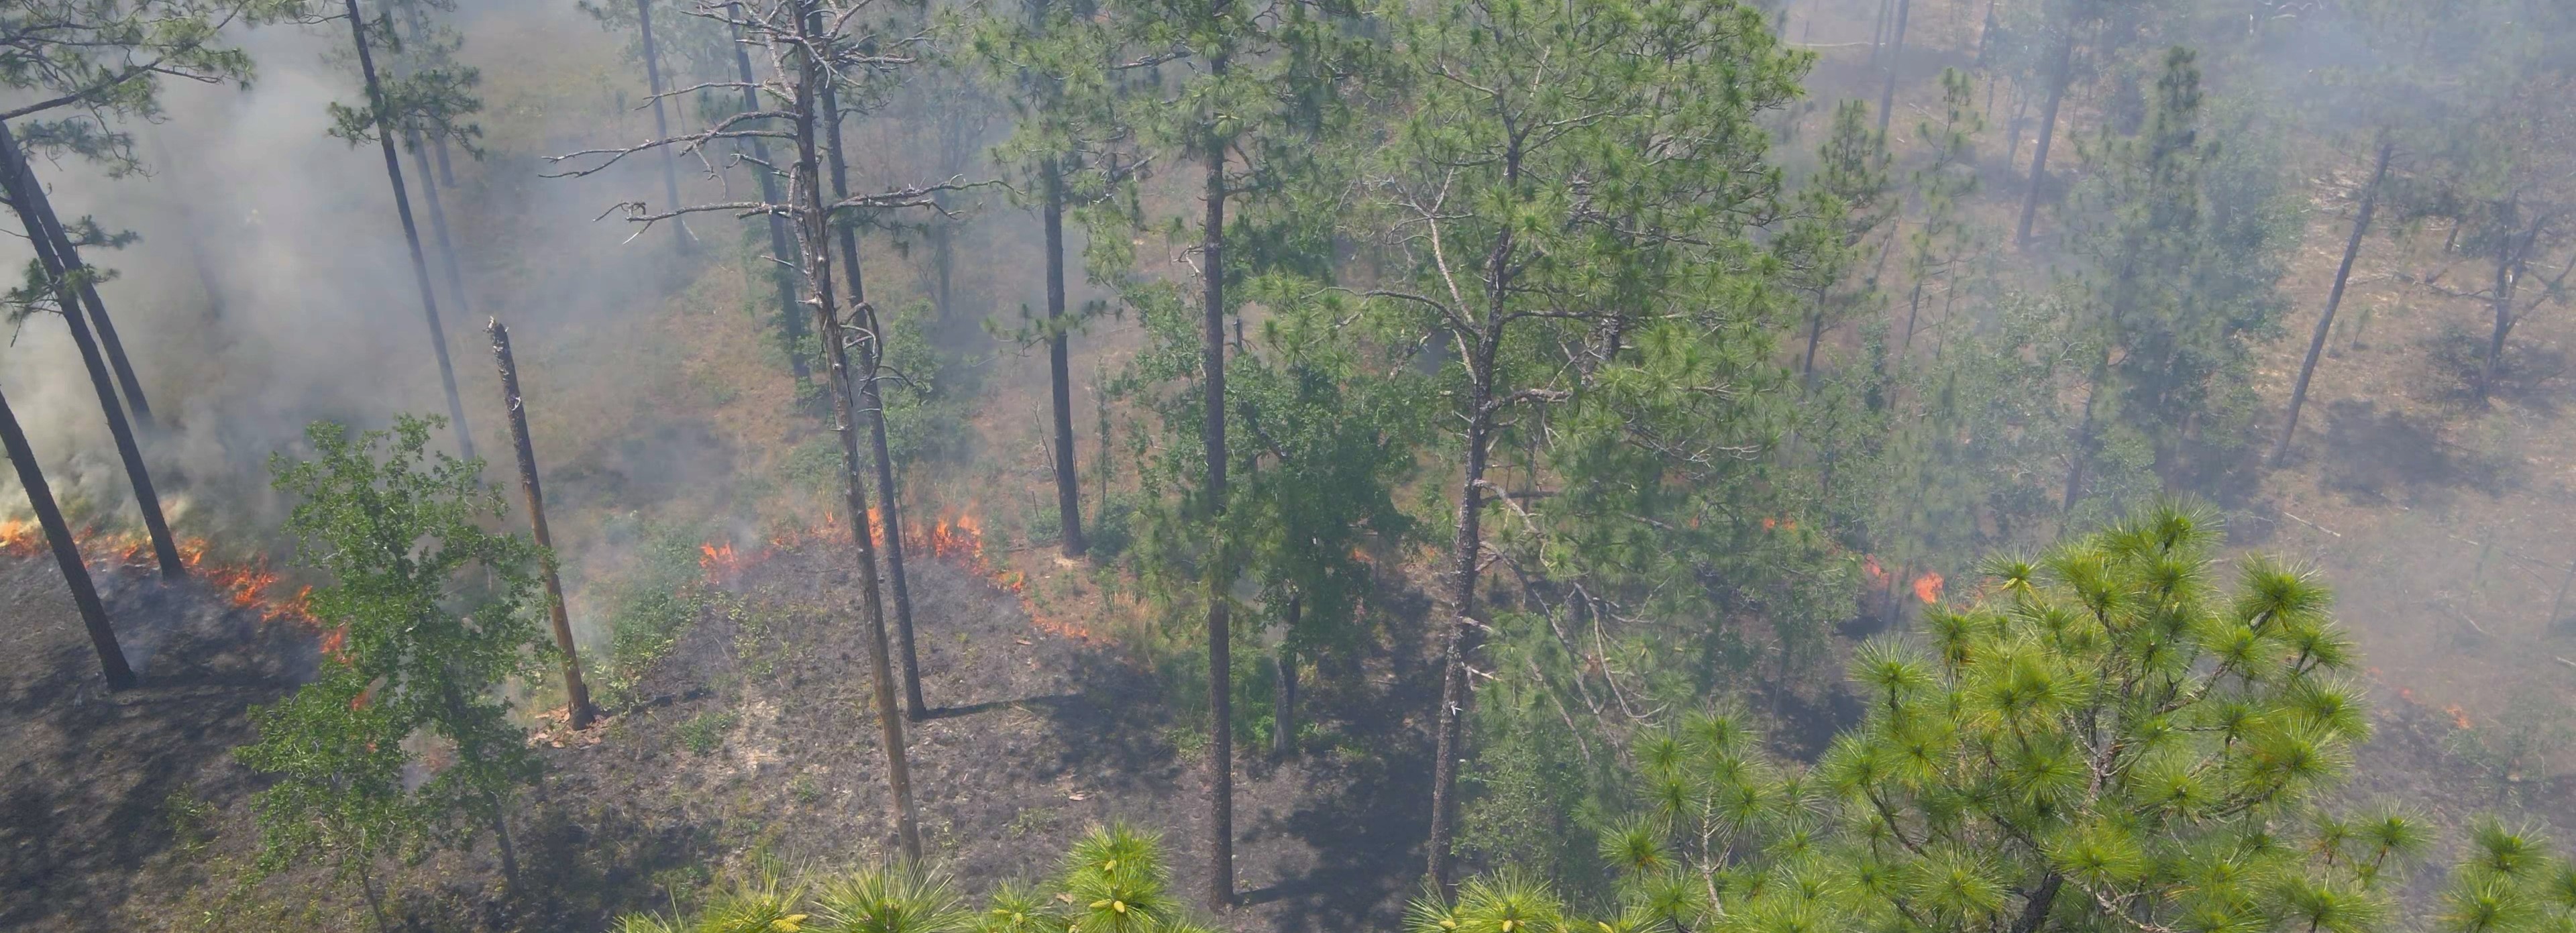 "Aerial image of a slow burning controlled fire in a longleaf pine system"